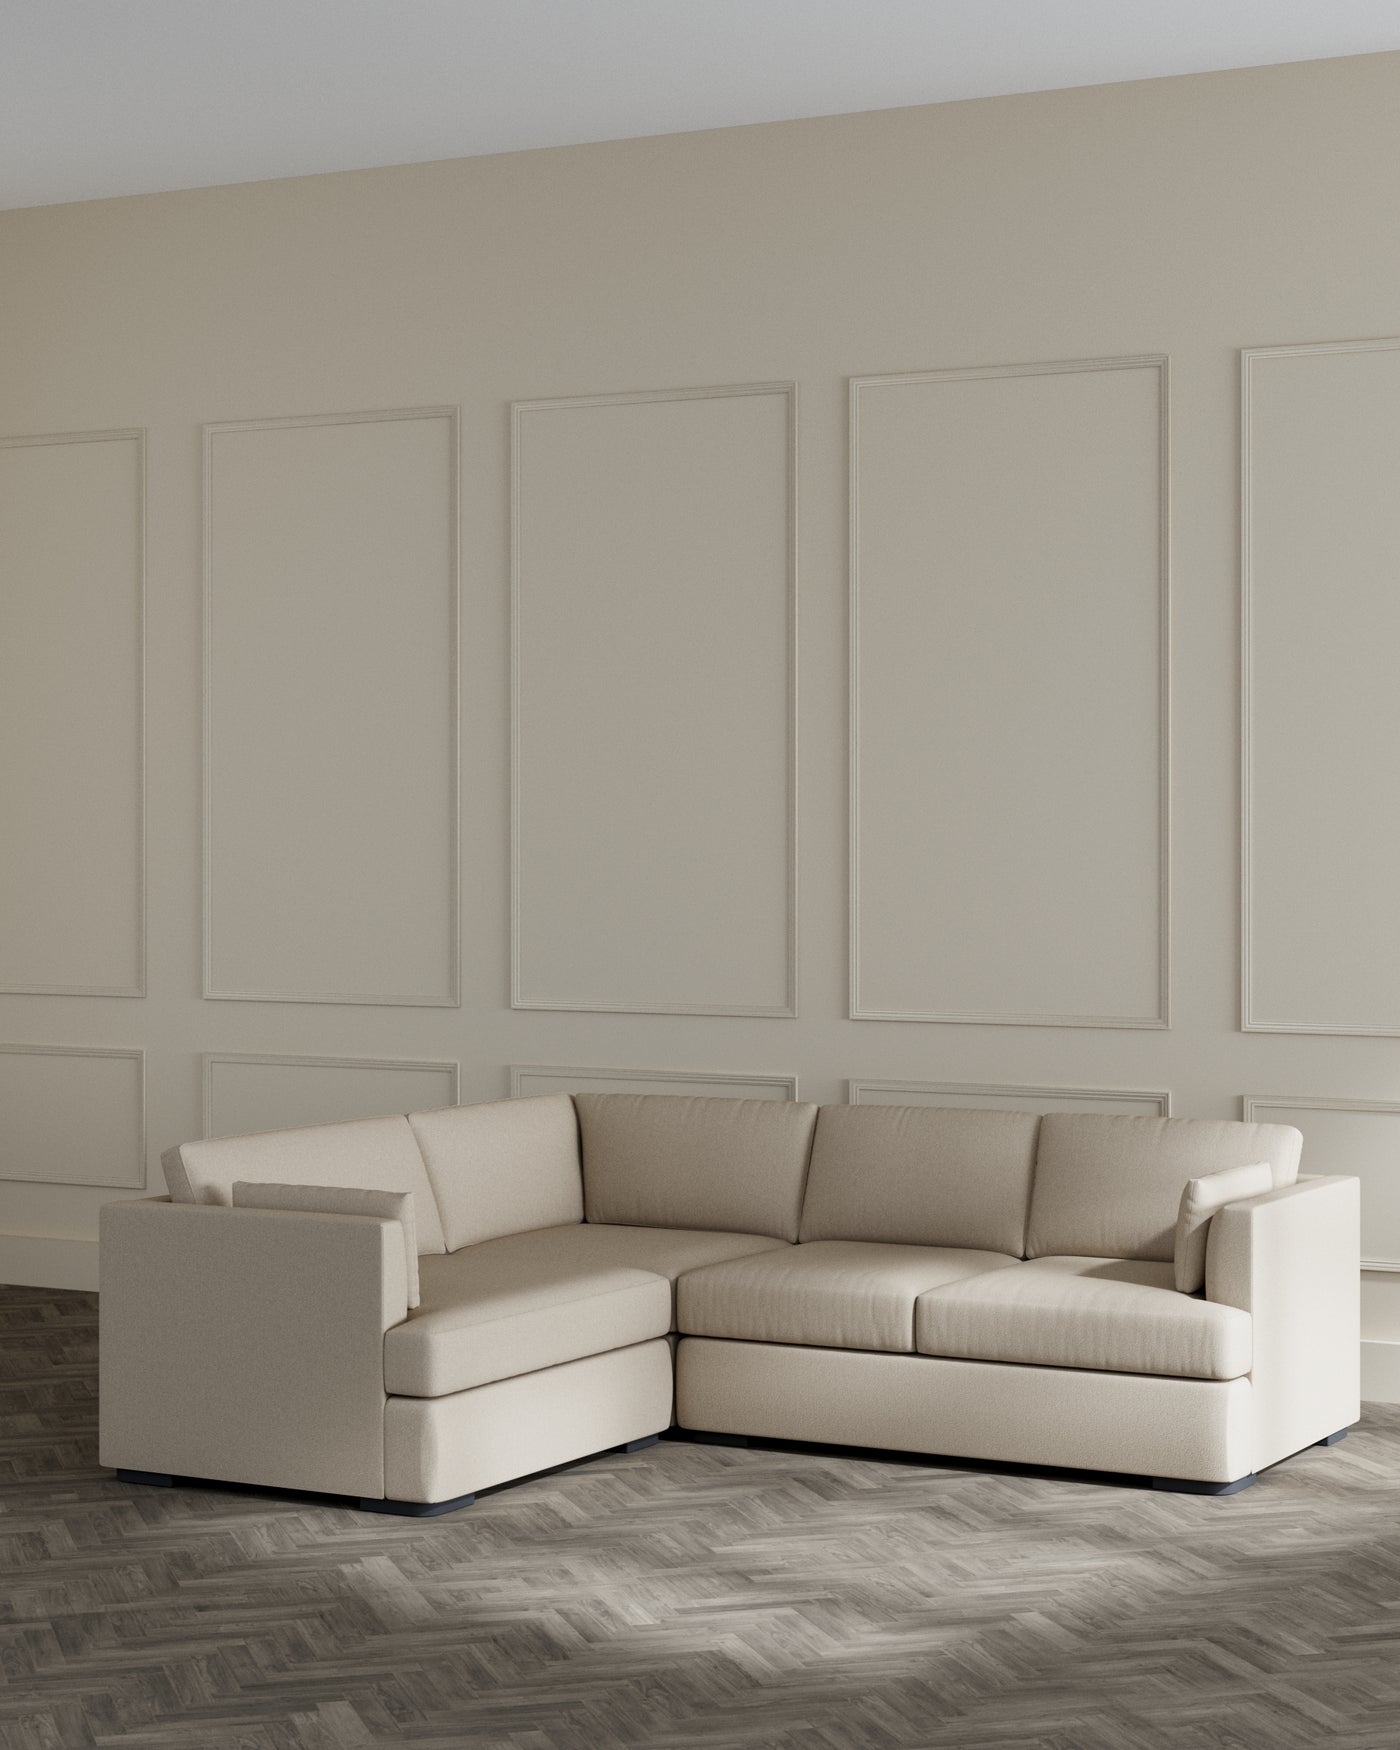 Modern beige upholstered L-shaped sectional sofa with clean lines, boxy frame, and low armrests against a neutral wall in a minimalist living room setting.